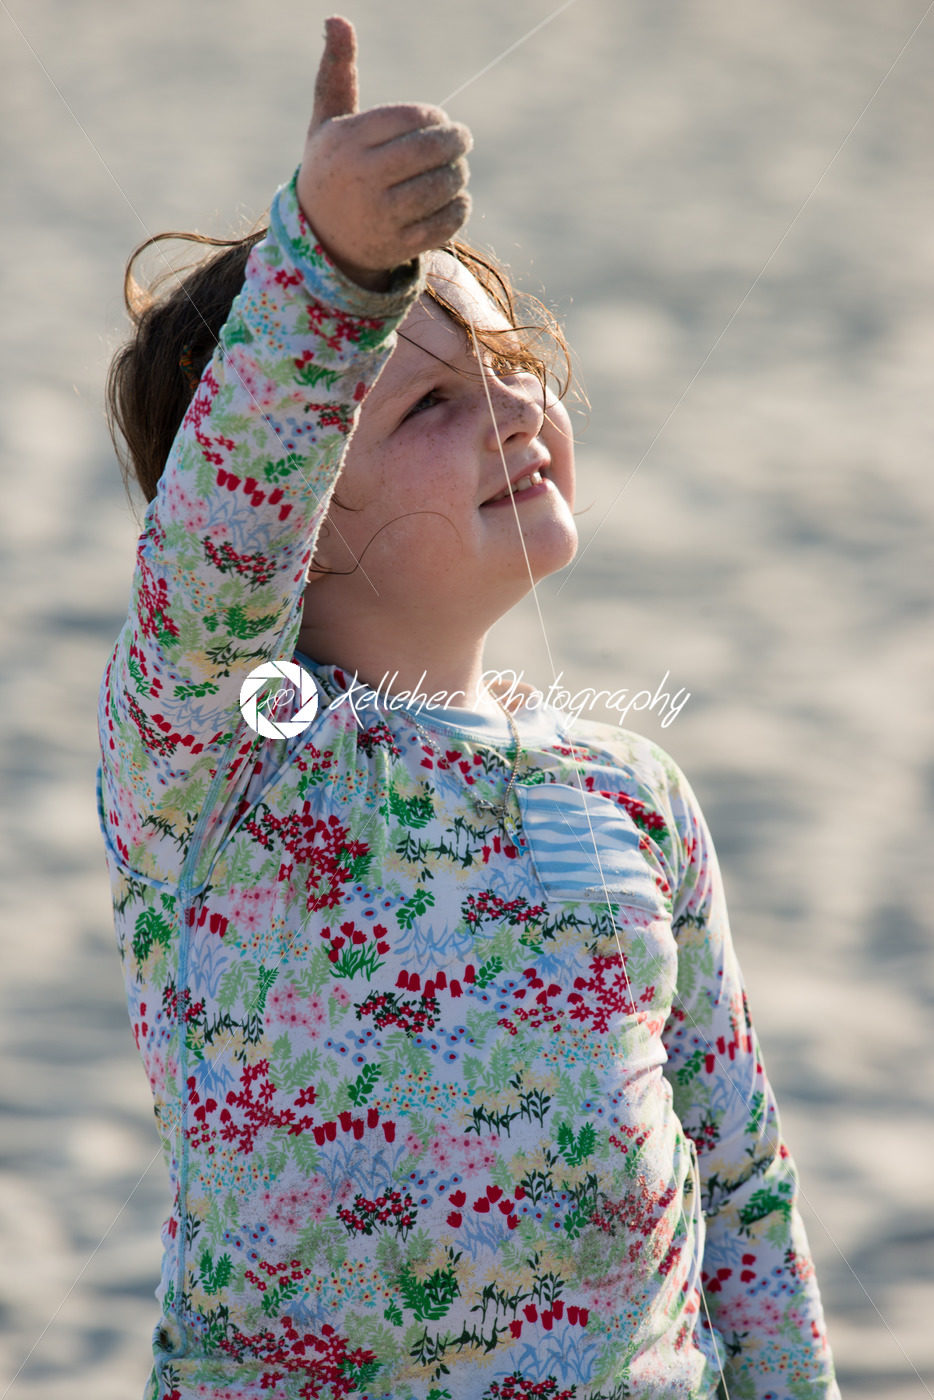 Young girl on beach with kite smiling - Kelleher Photography Store